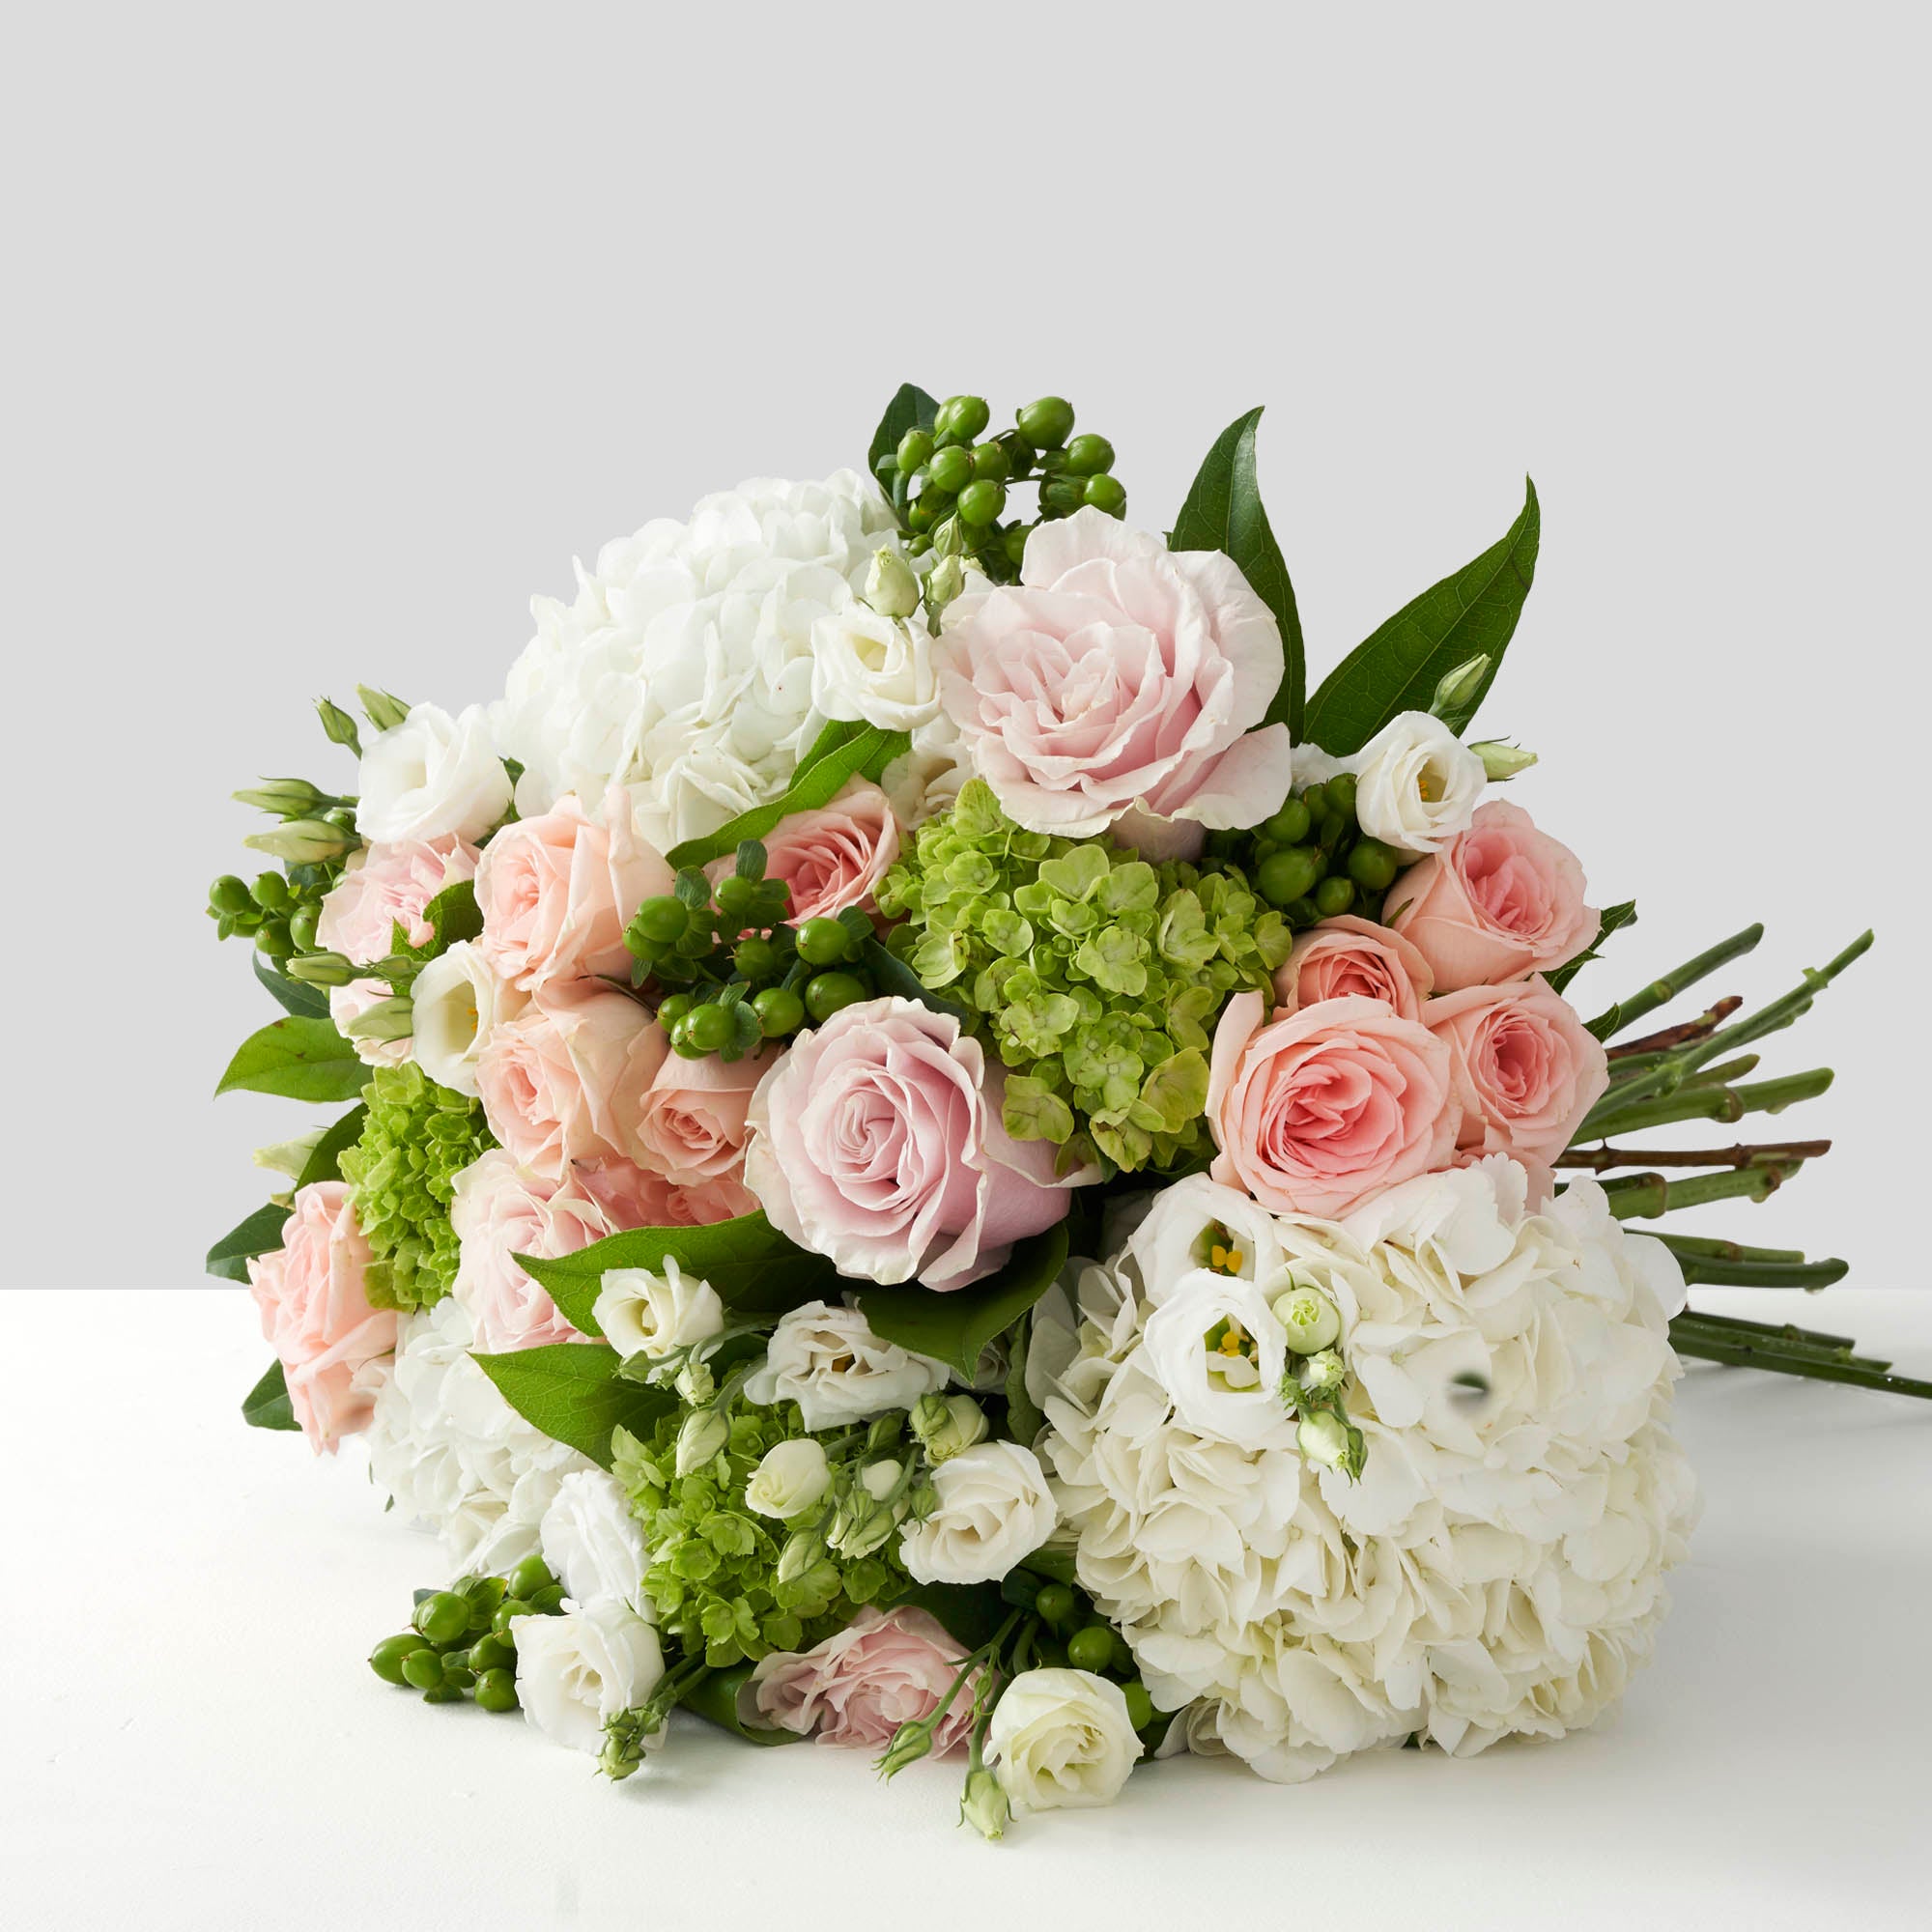 Round handtied bouquet in white, green, and soft pink, laying on white background.